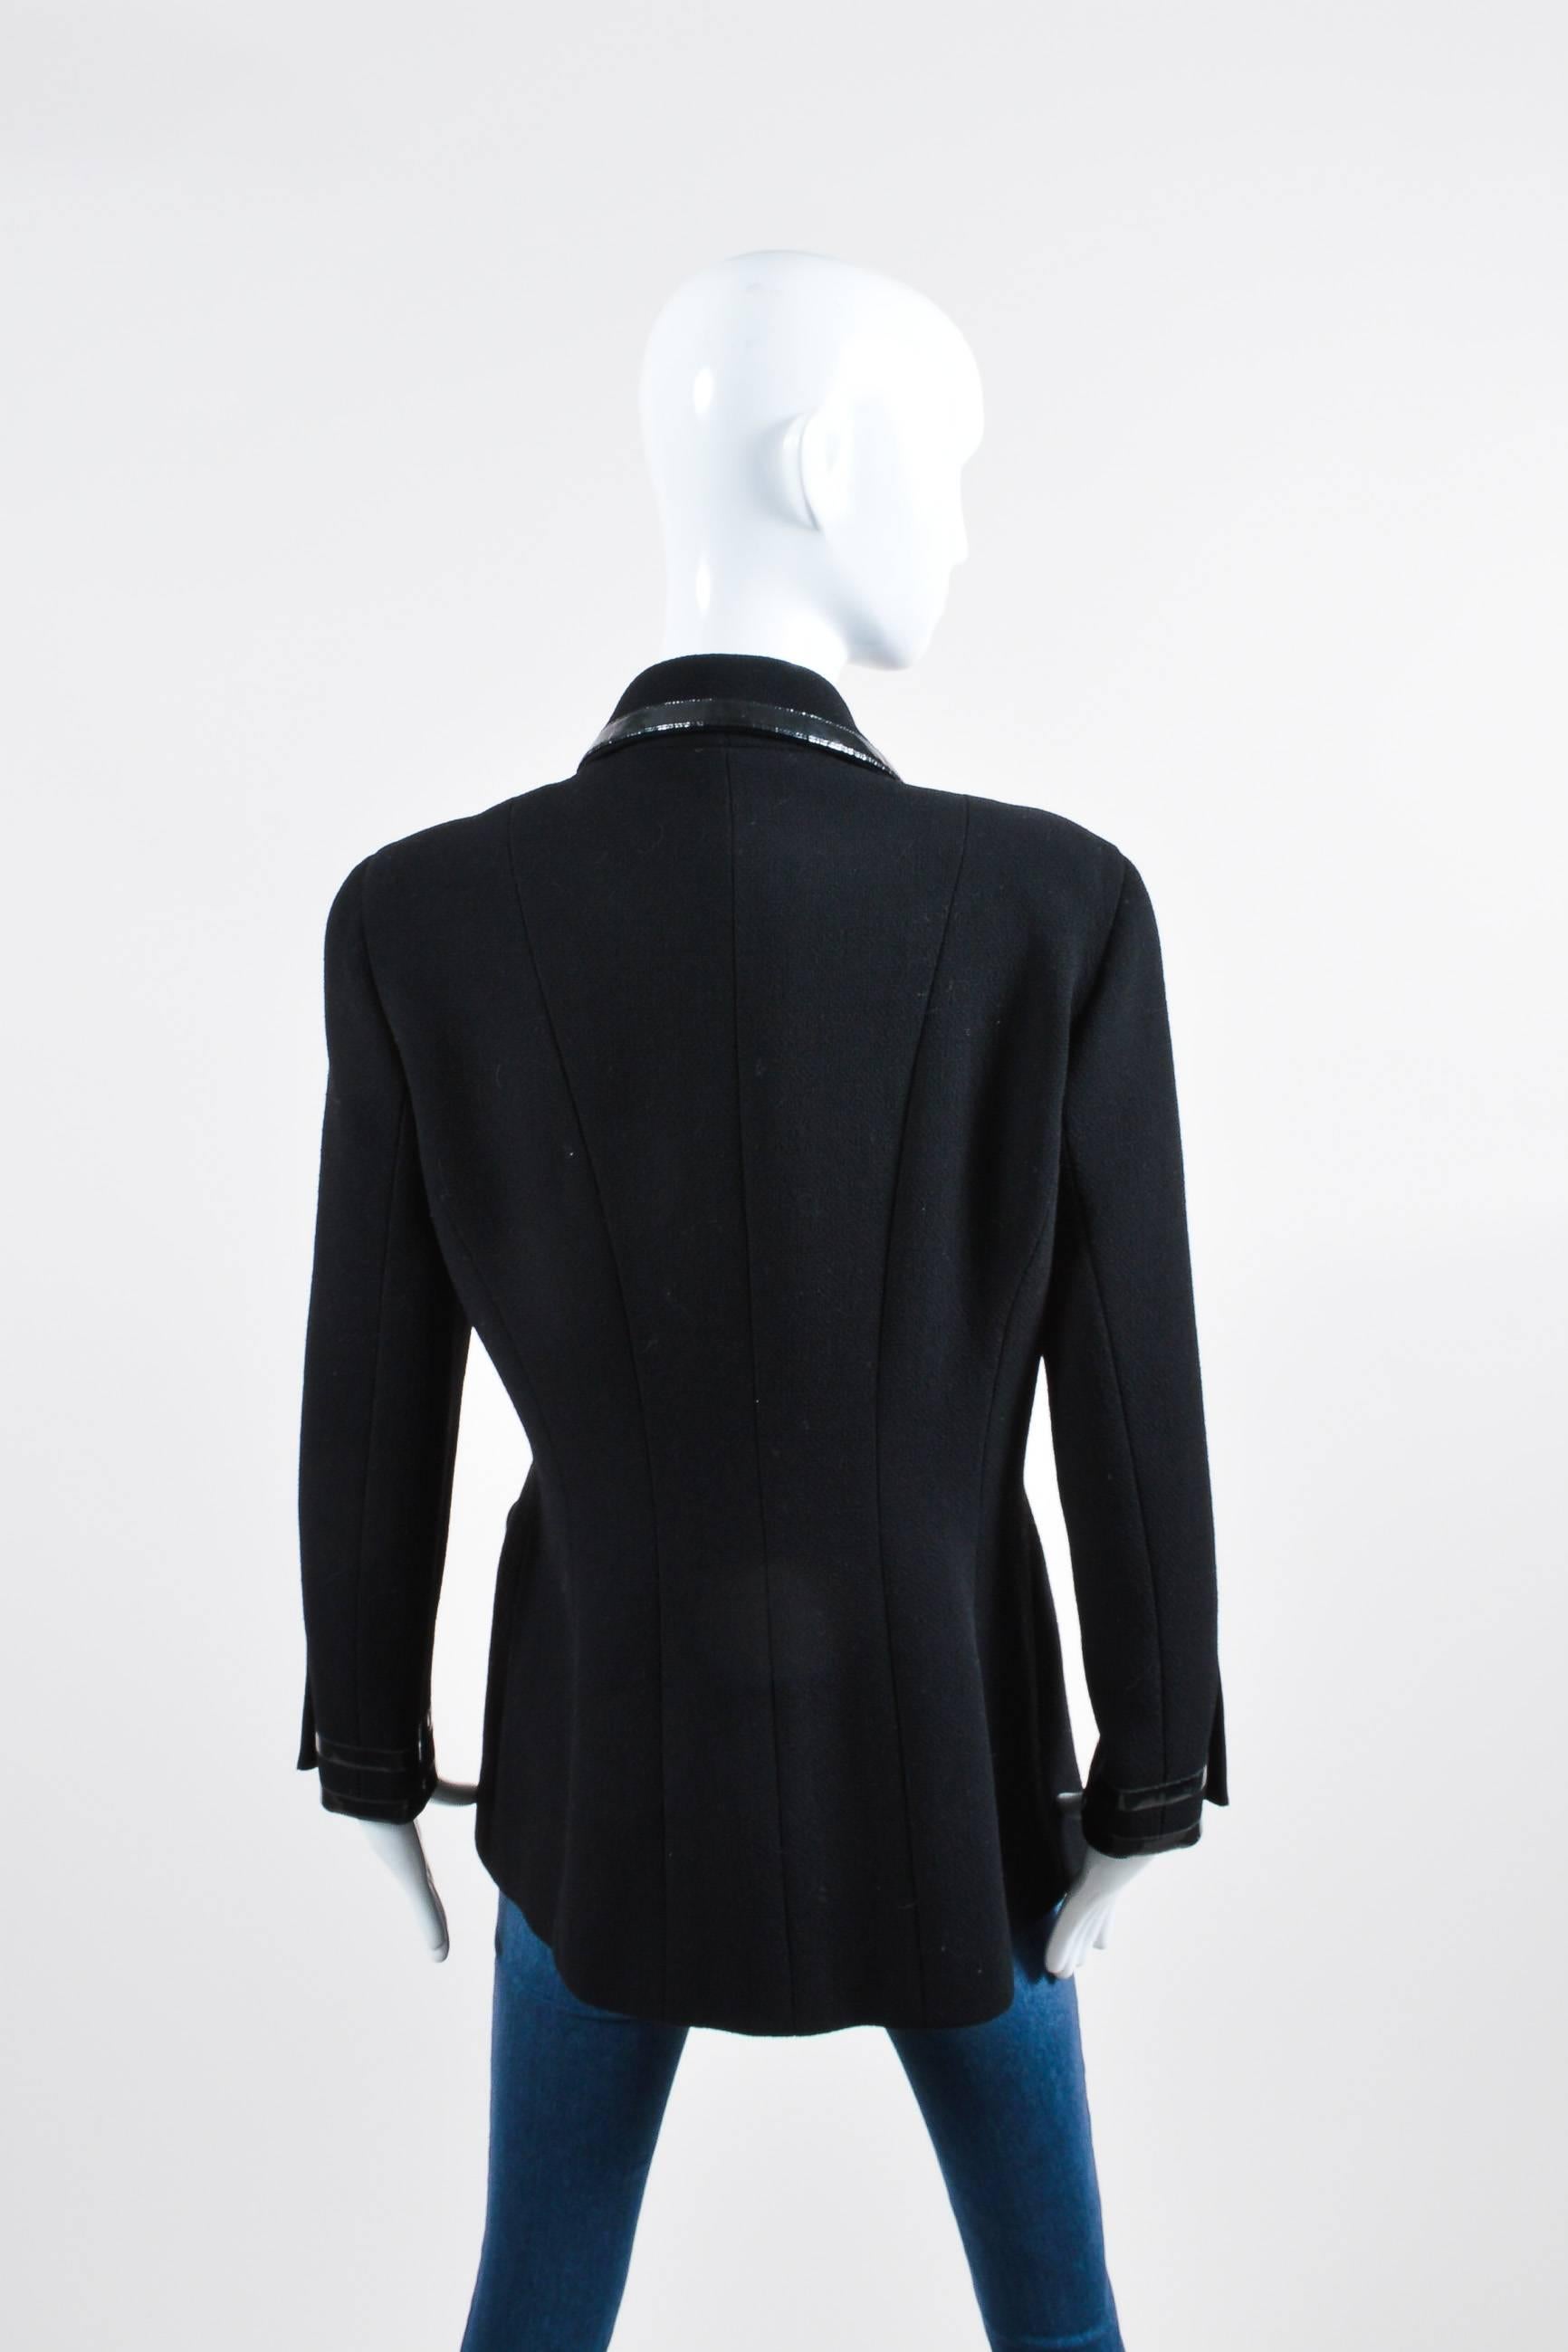 Vintage Chanel Black Wool Patent Leather Trim Button Long Tailored Jacket SZ 44 In Good Condition For Sale In Chicago, IL